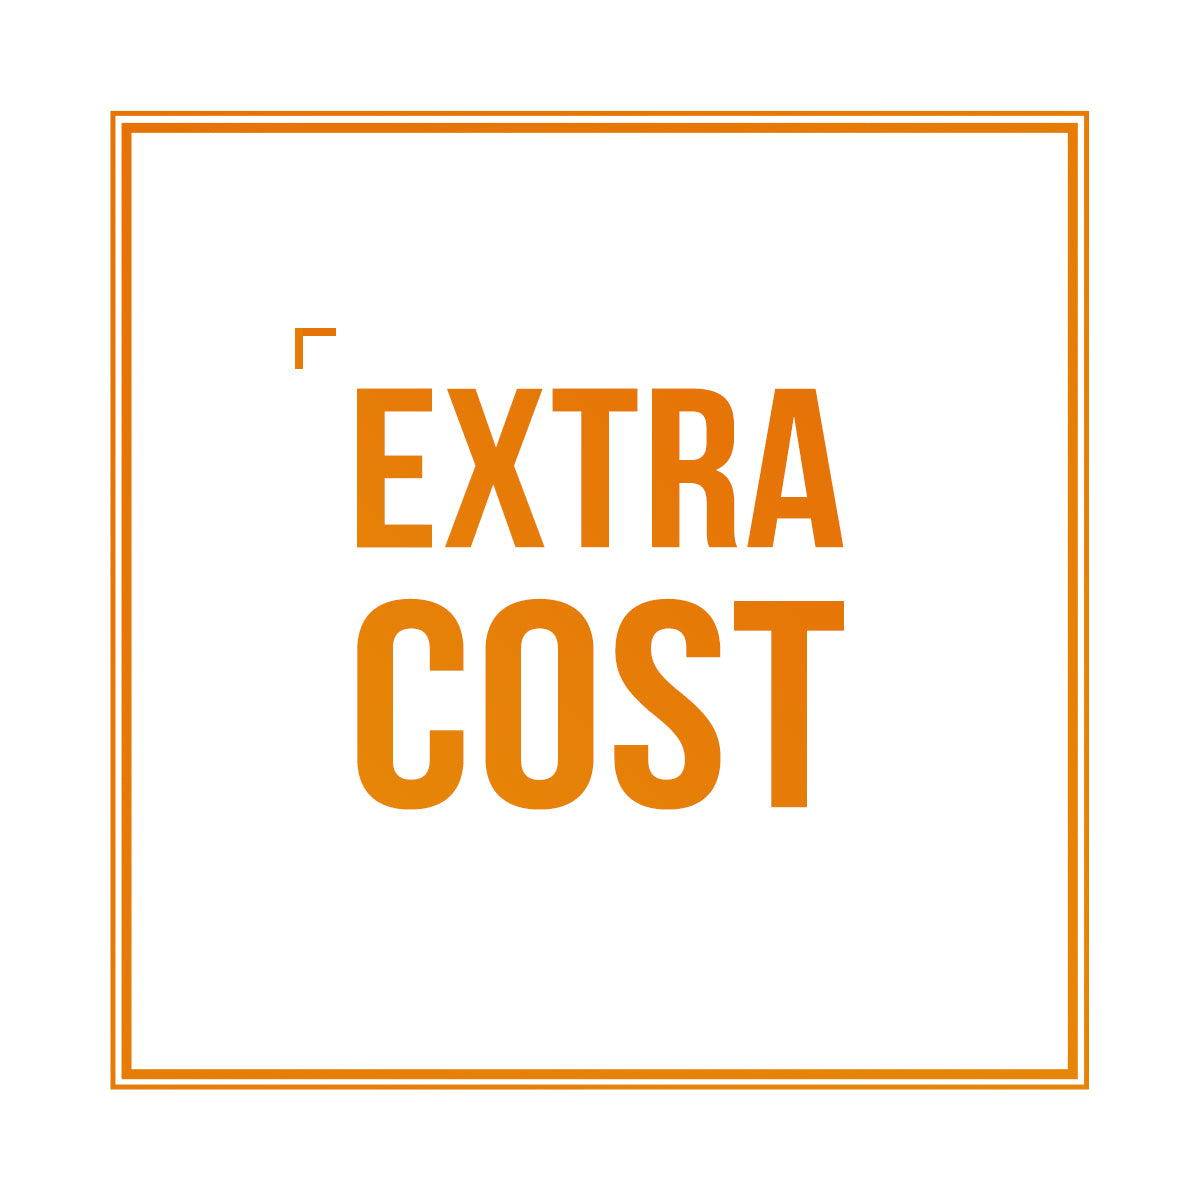 EXTRA COST